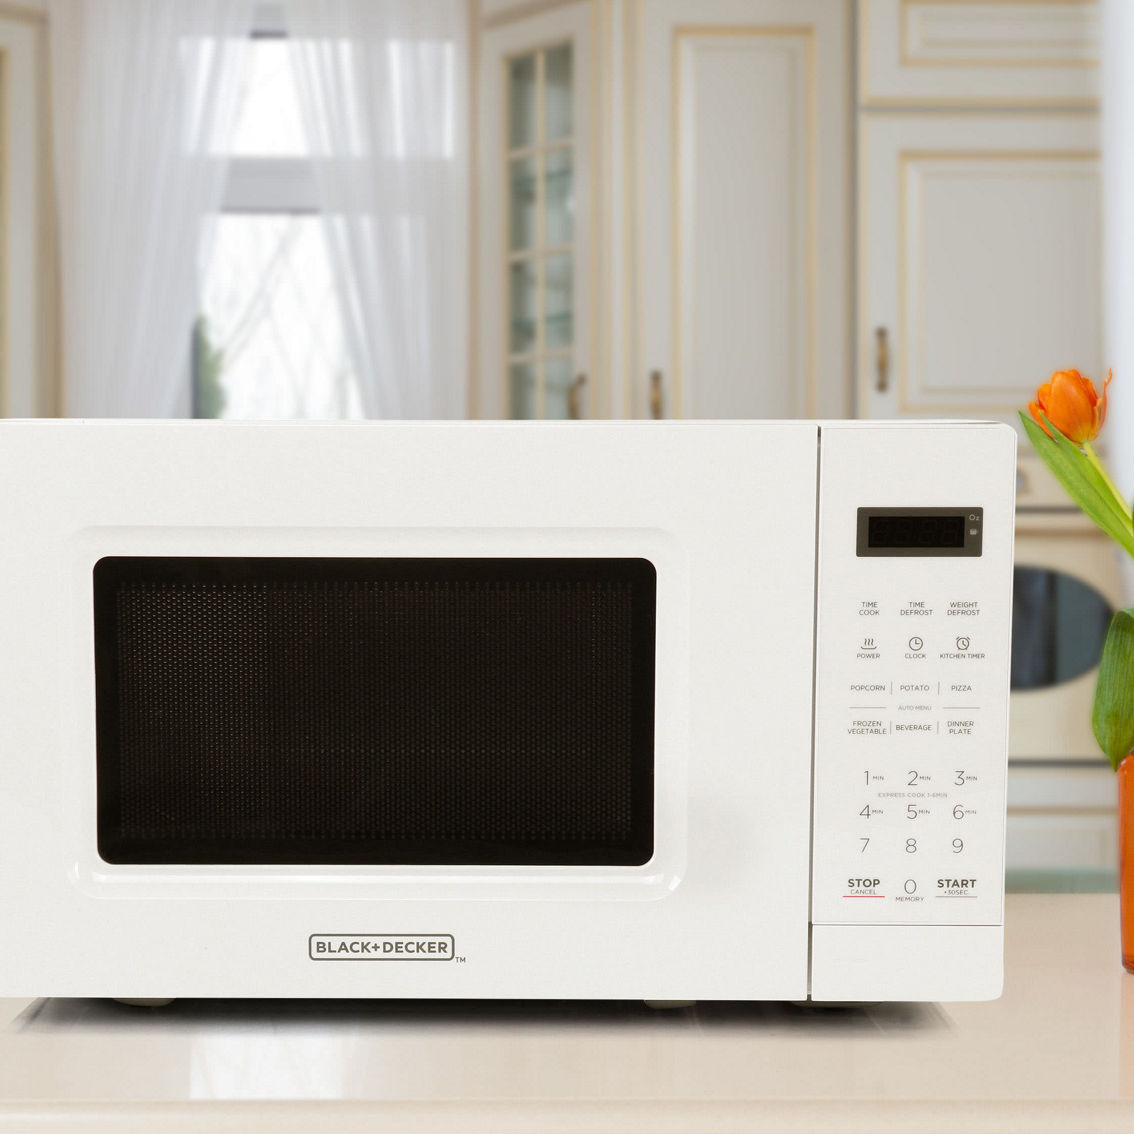 Black and Decker 0.7 Cu Ft 700 Watt LED Digital Microwave Oven in White with Chi - Image 5 of 5